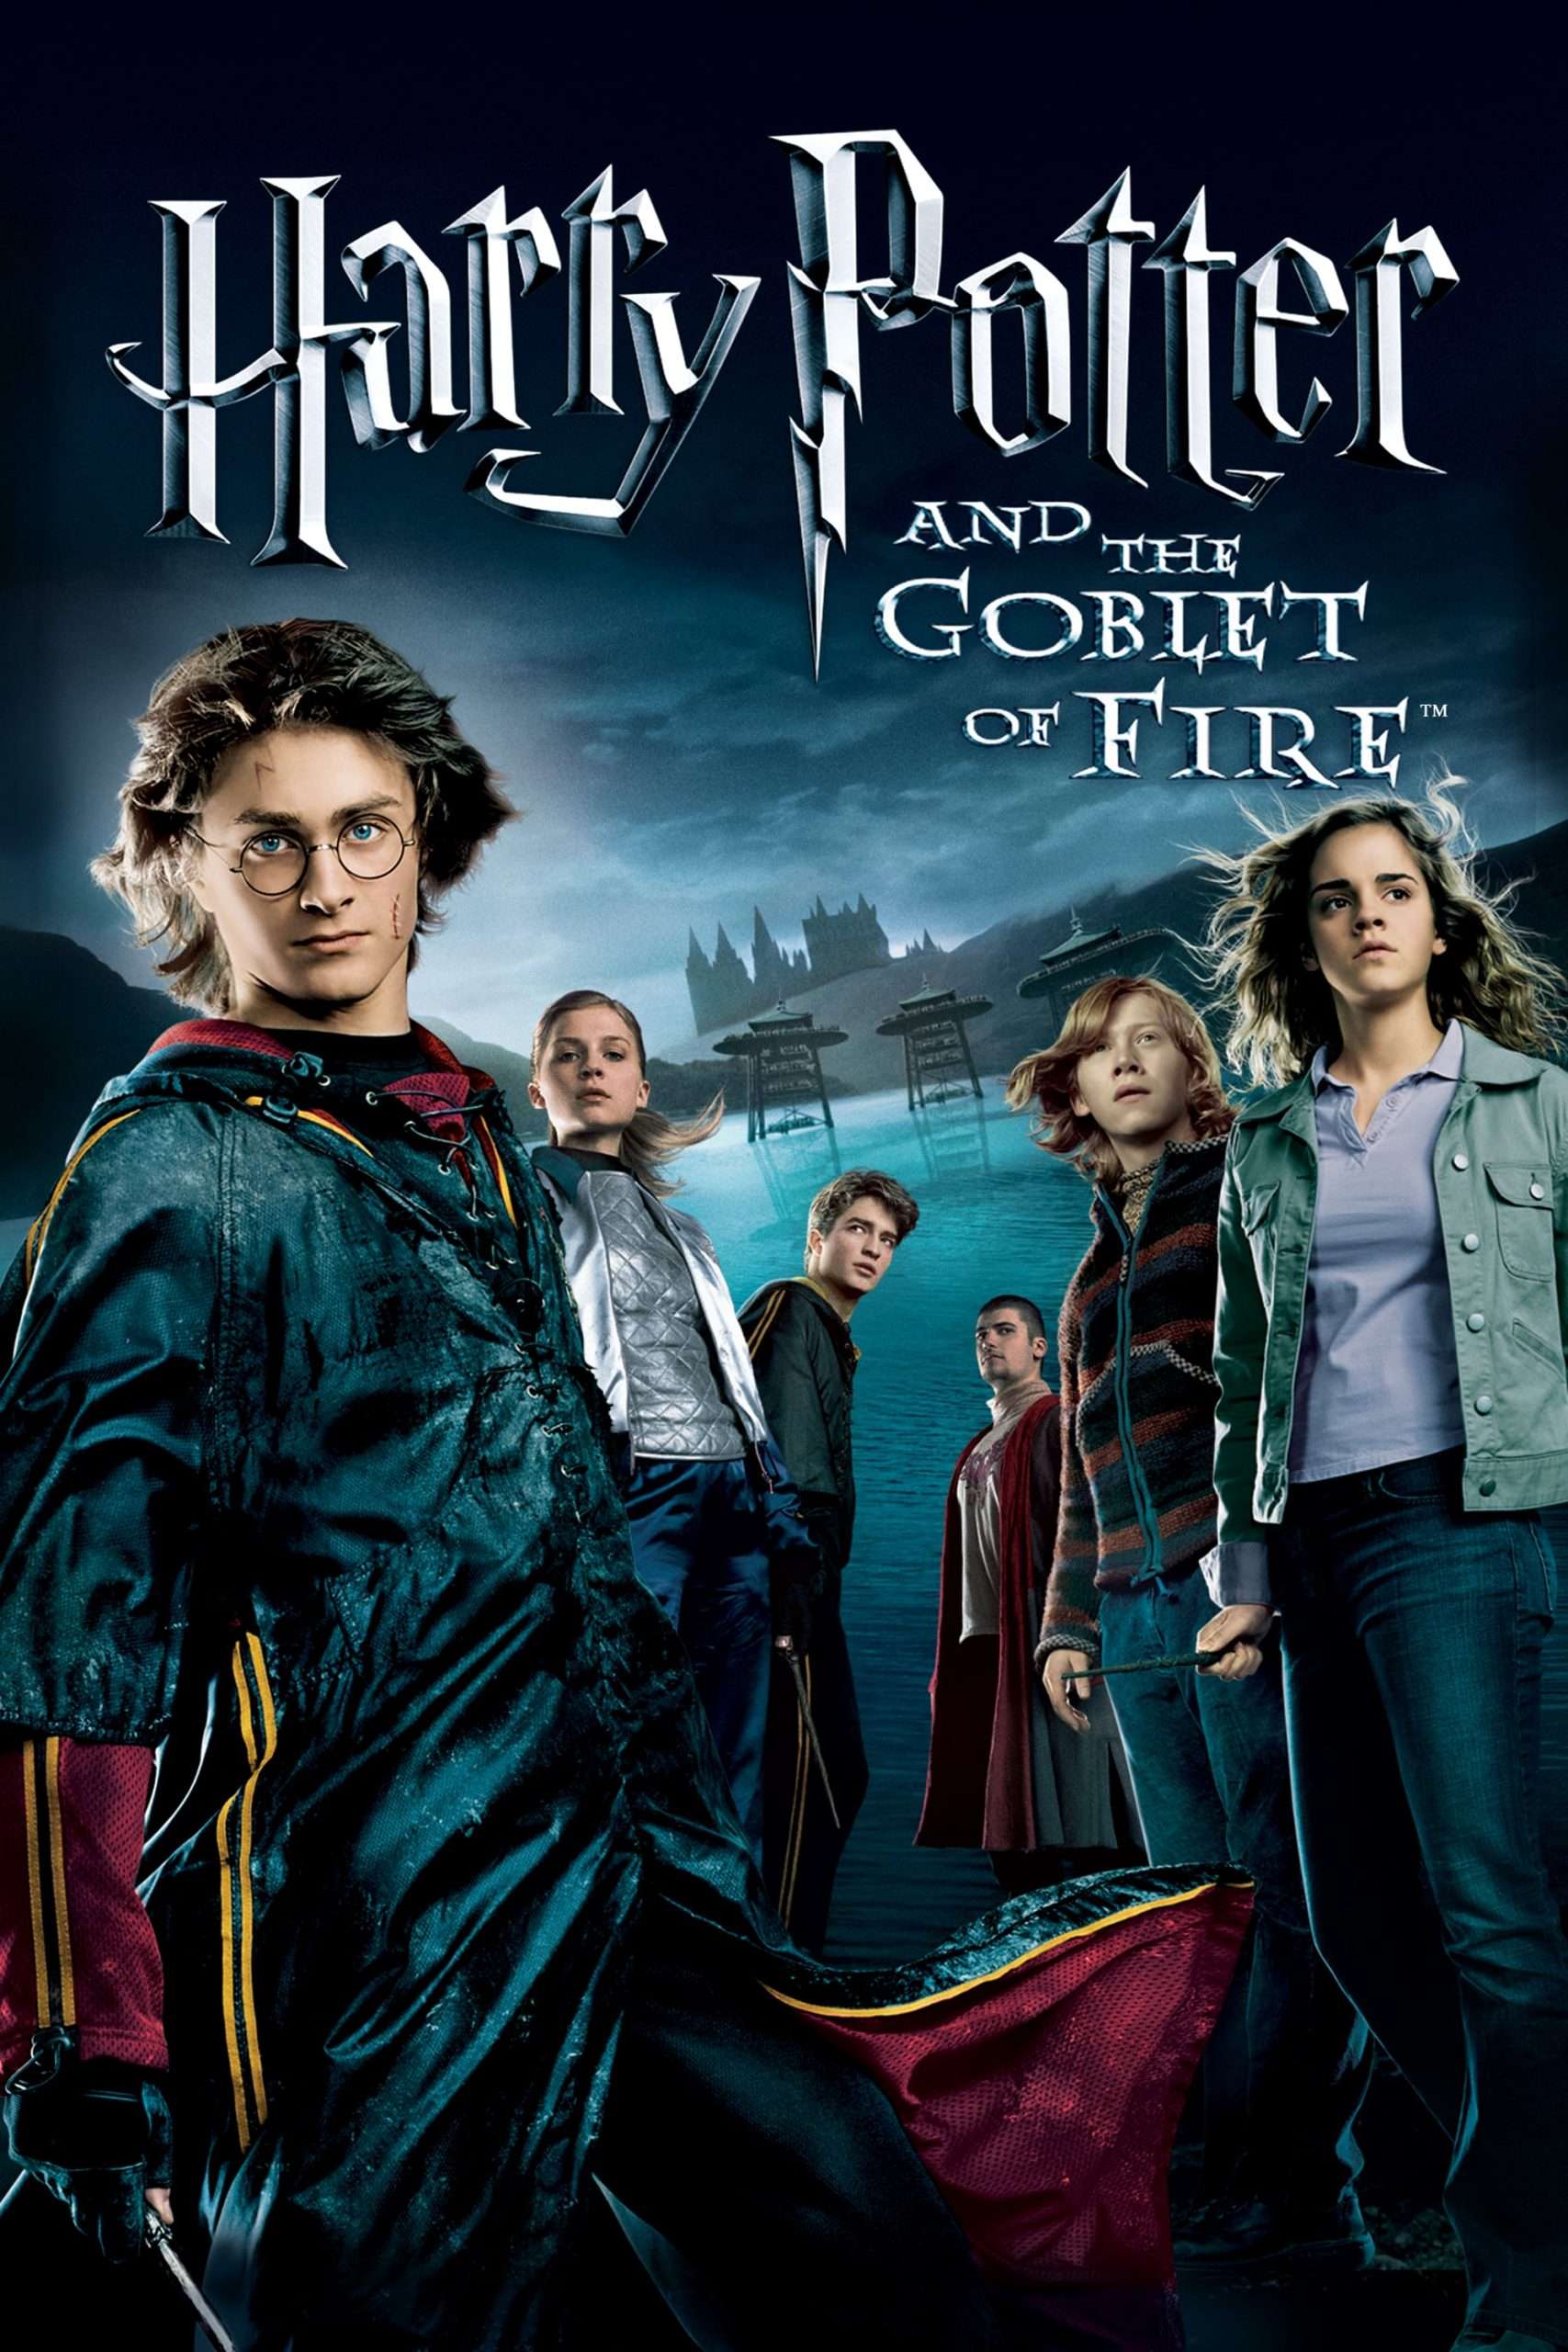 15 years ago toady, Harry Potter And The Goblet Of Fire ...